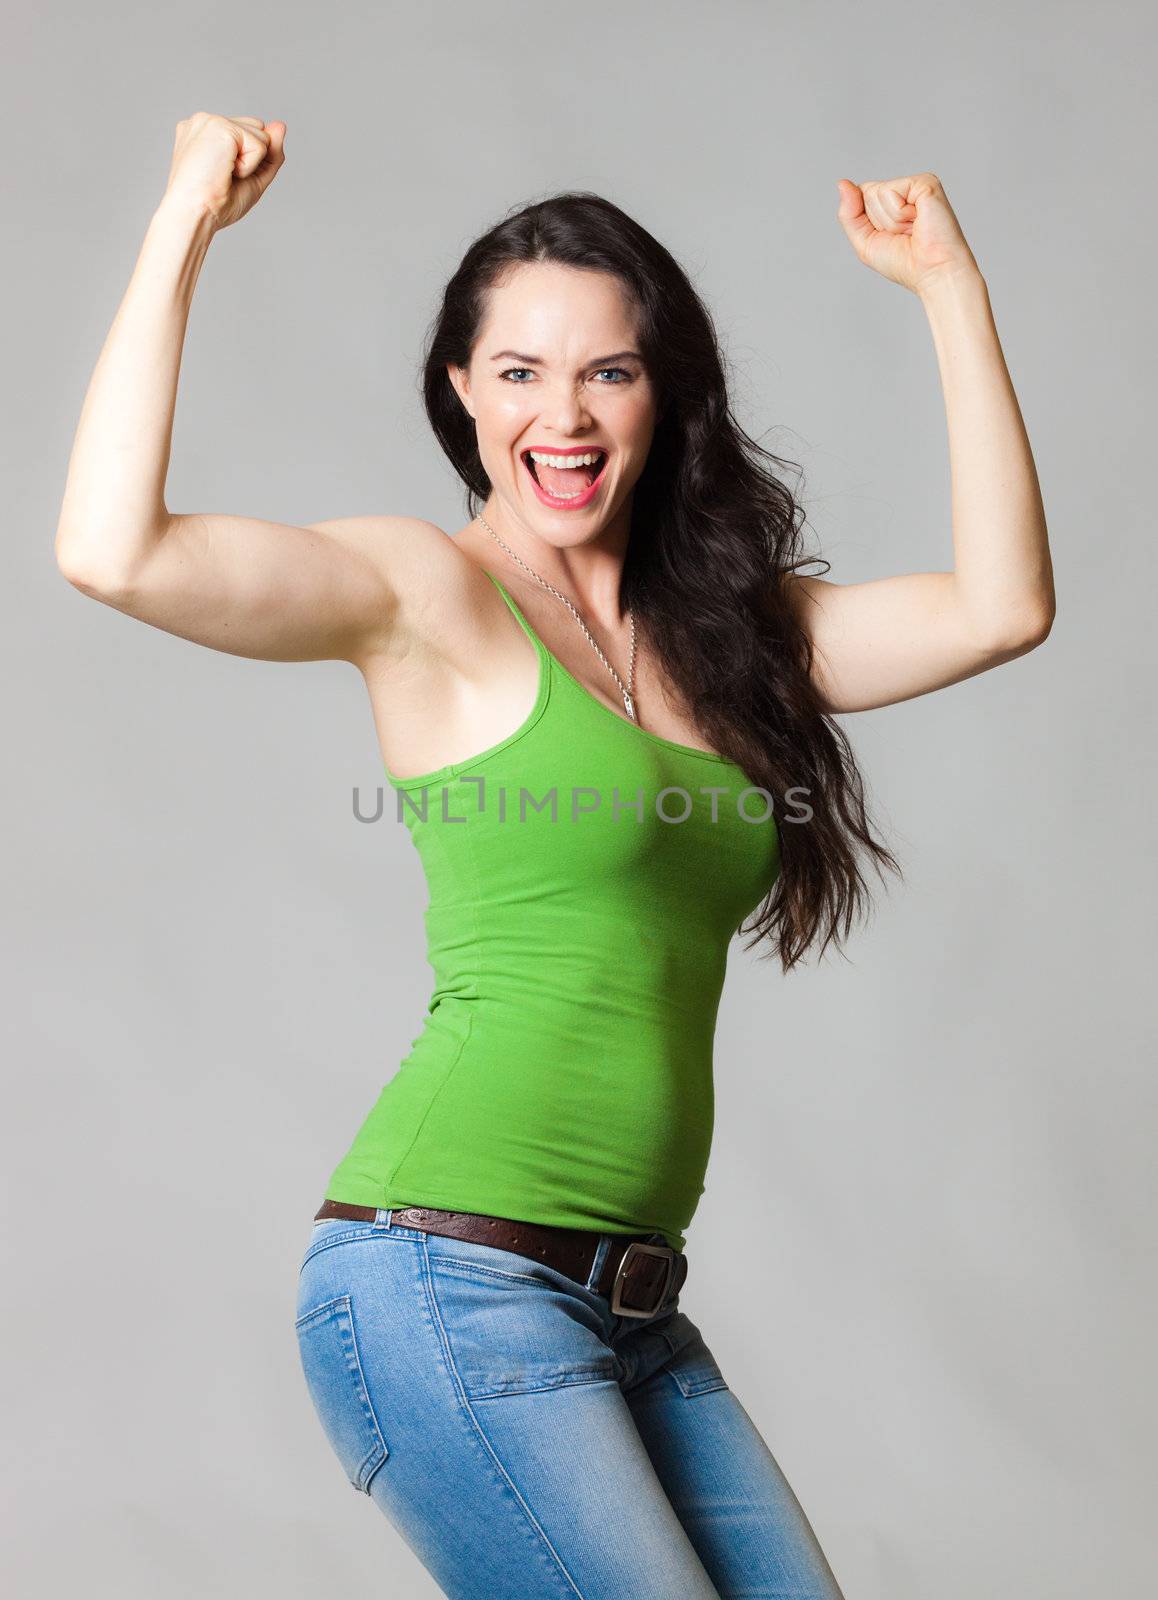 A happy cheerful young fit woman flexing her muscles